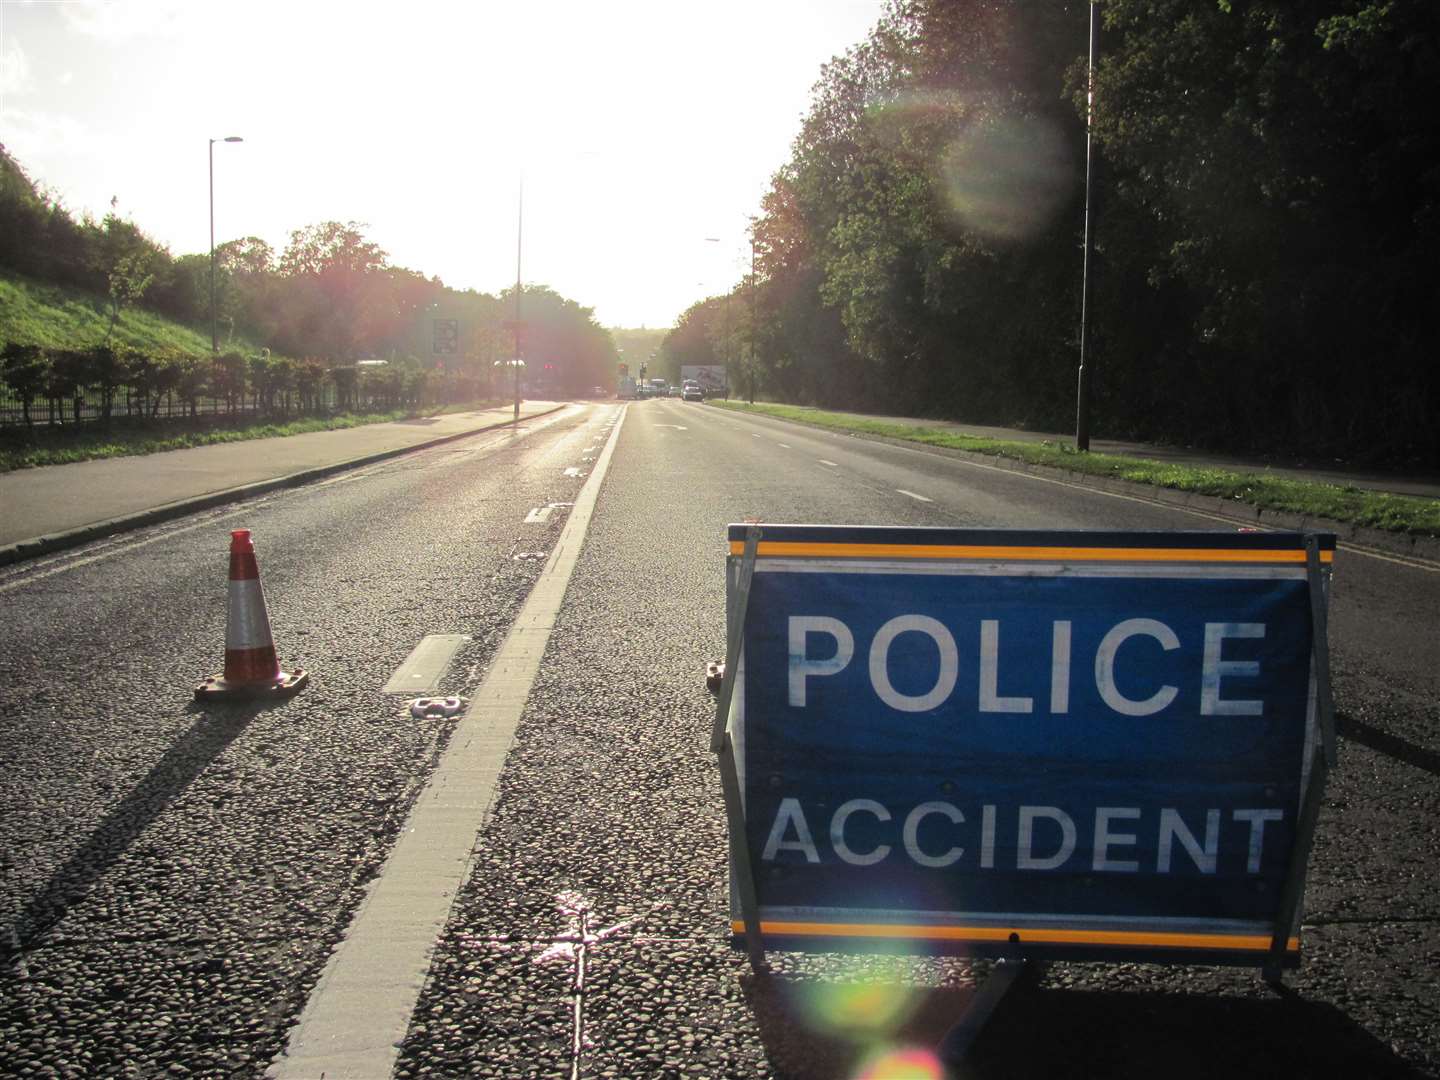 Police were called to the incident on the M20 earlier today